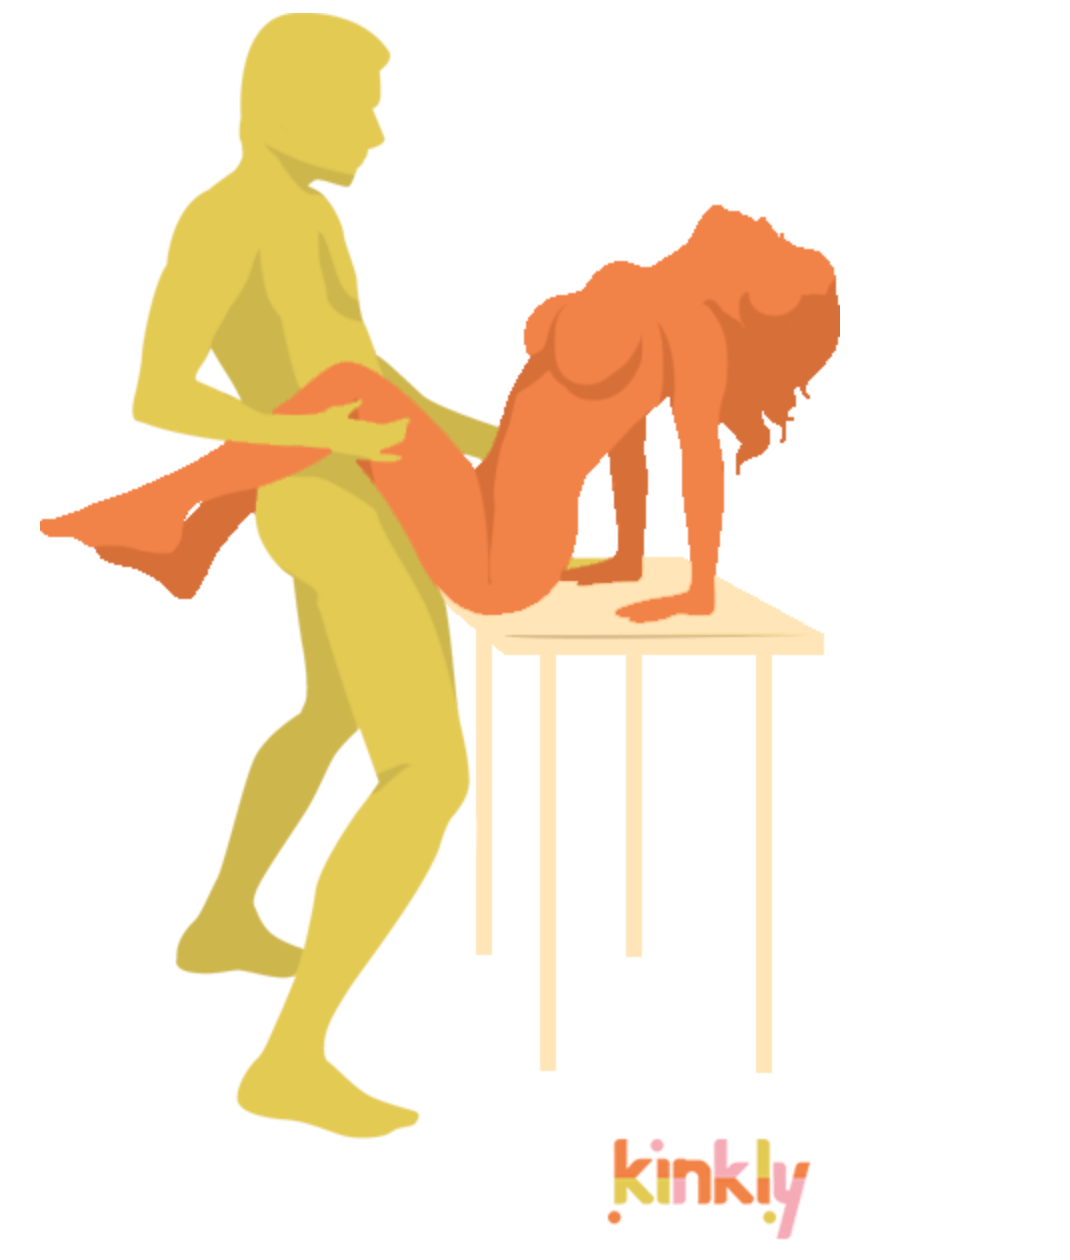 Tabletop position: The receiving partner sits on the edge of an elevated surface, like a table, supporting themselves with their hands. The penetrating partner stands in-between the receiving partner's legs, facing them, and penetrates them.